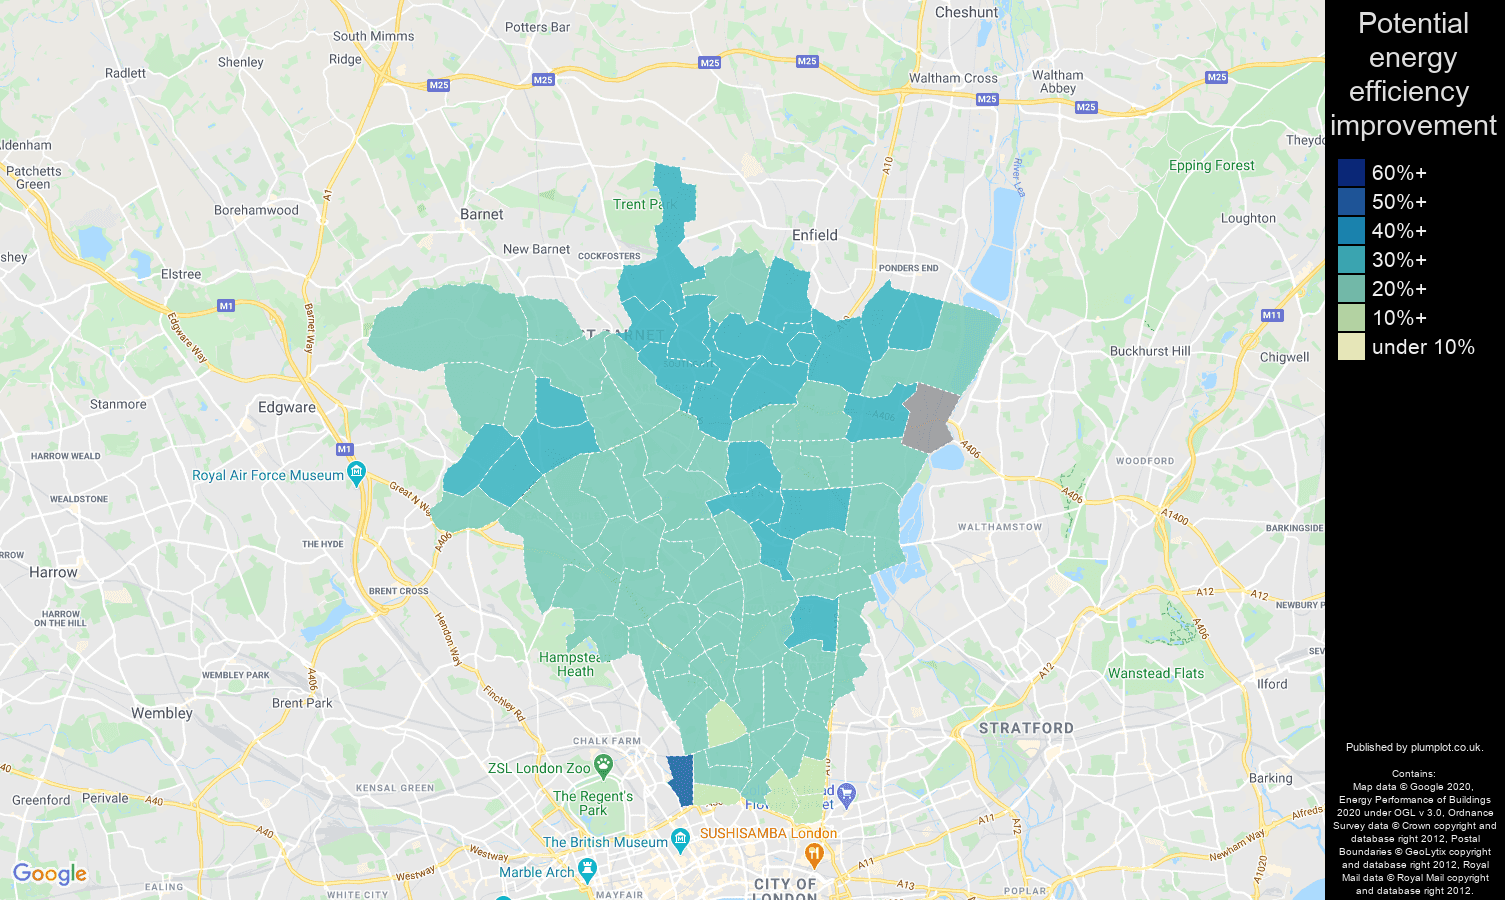 North London map of potential energy efficiency improvement of houses